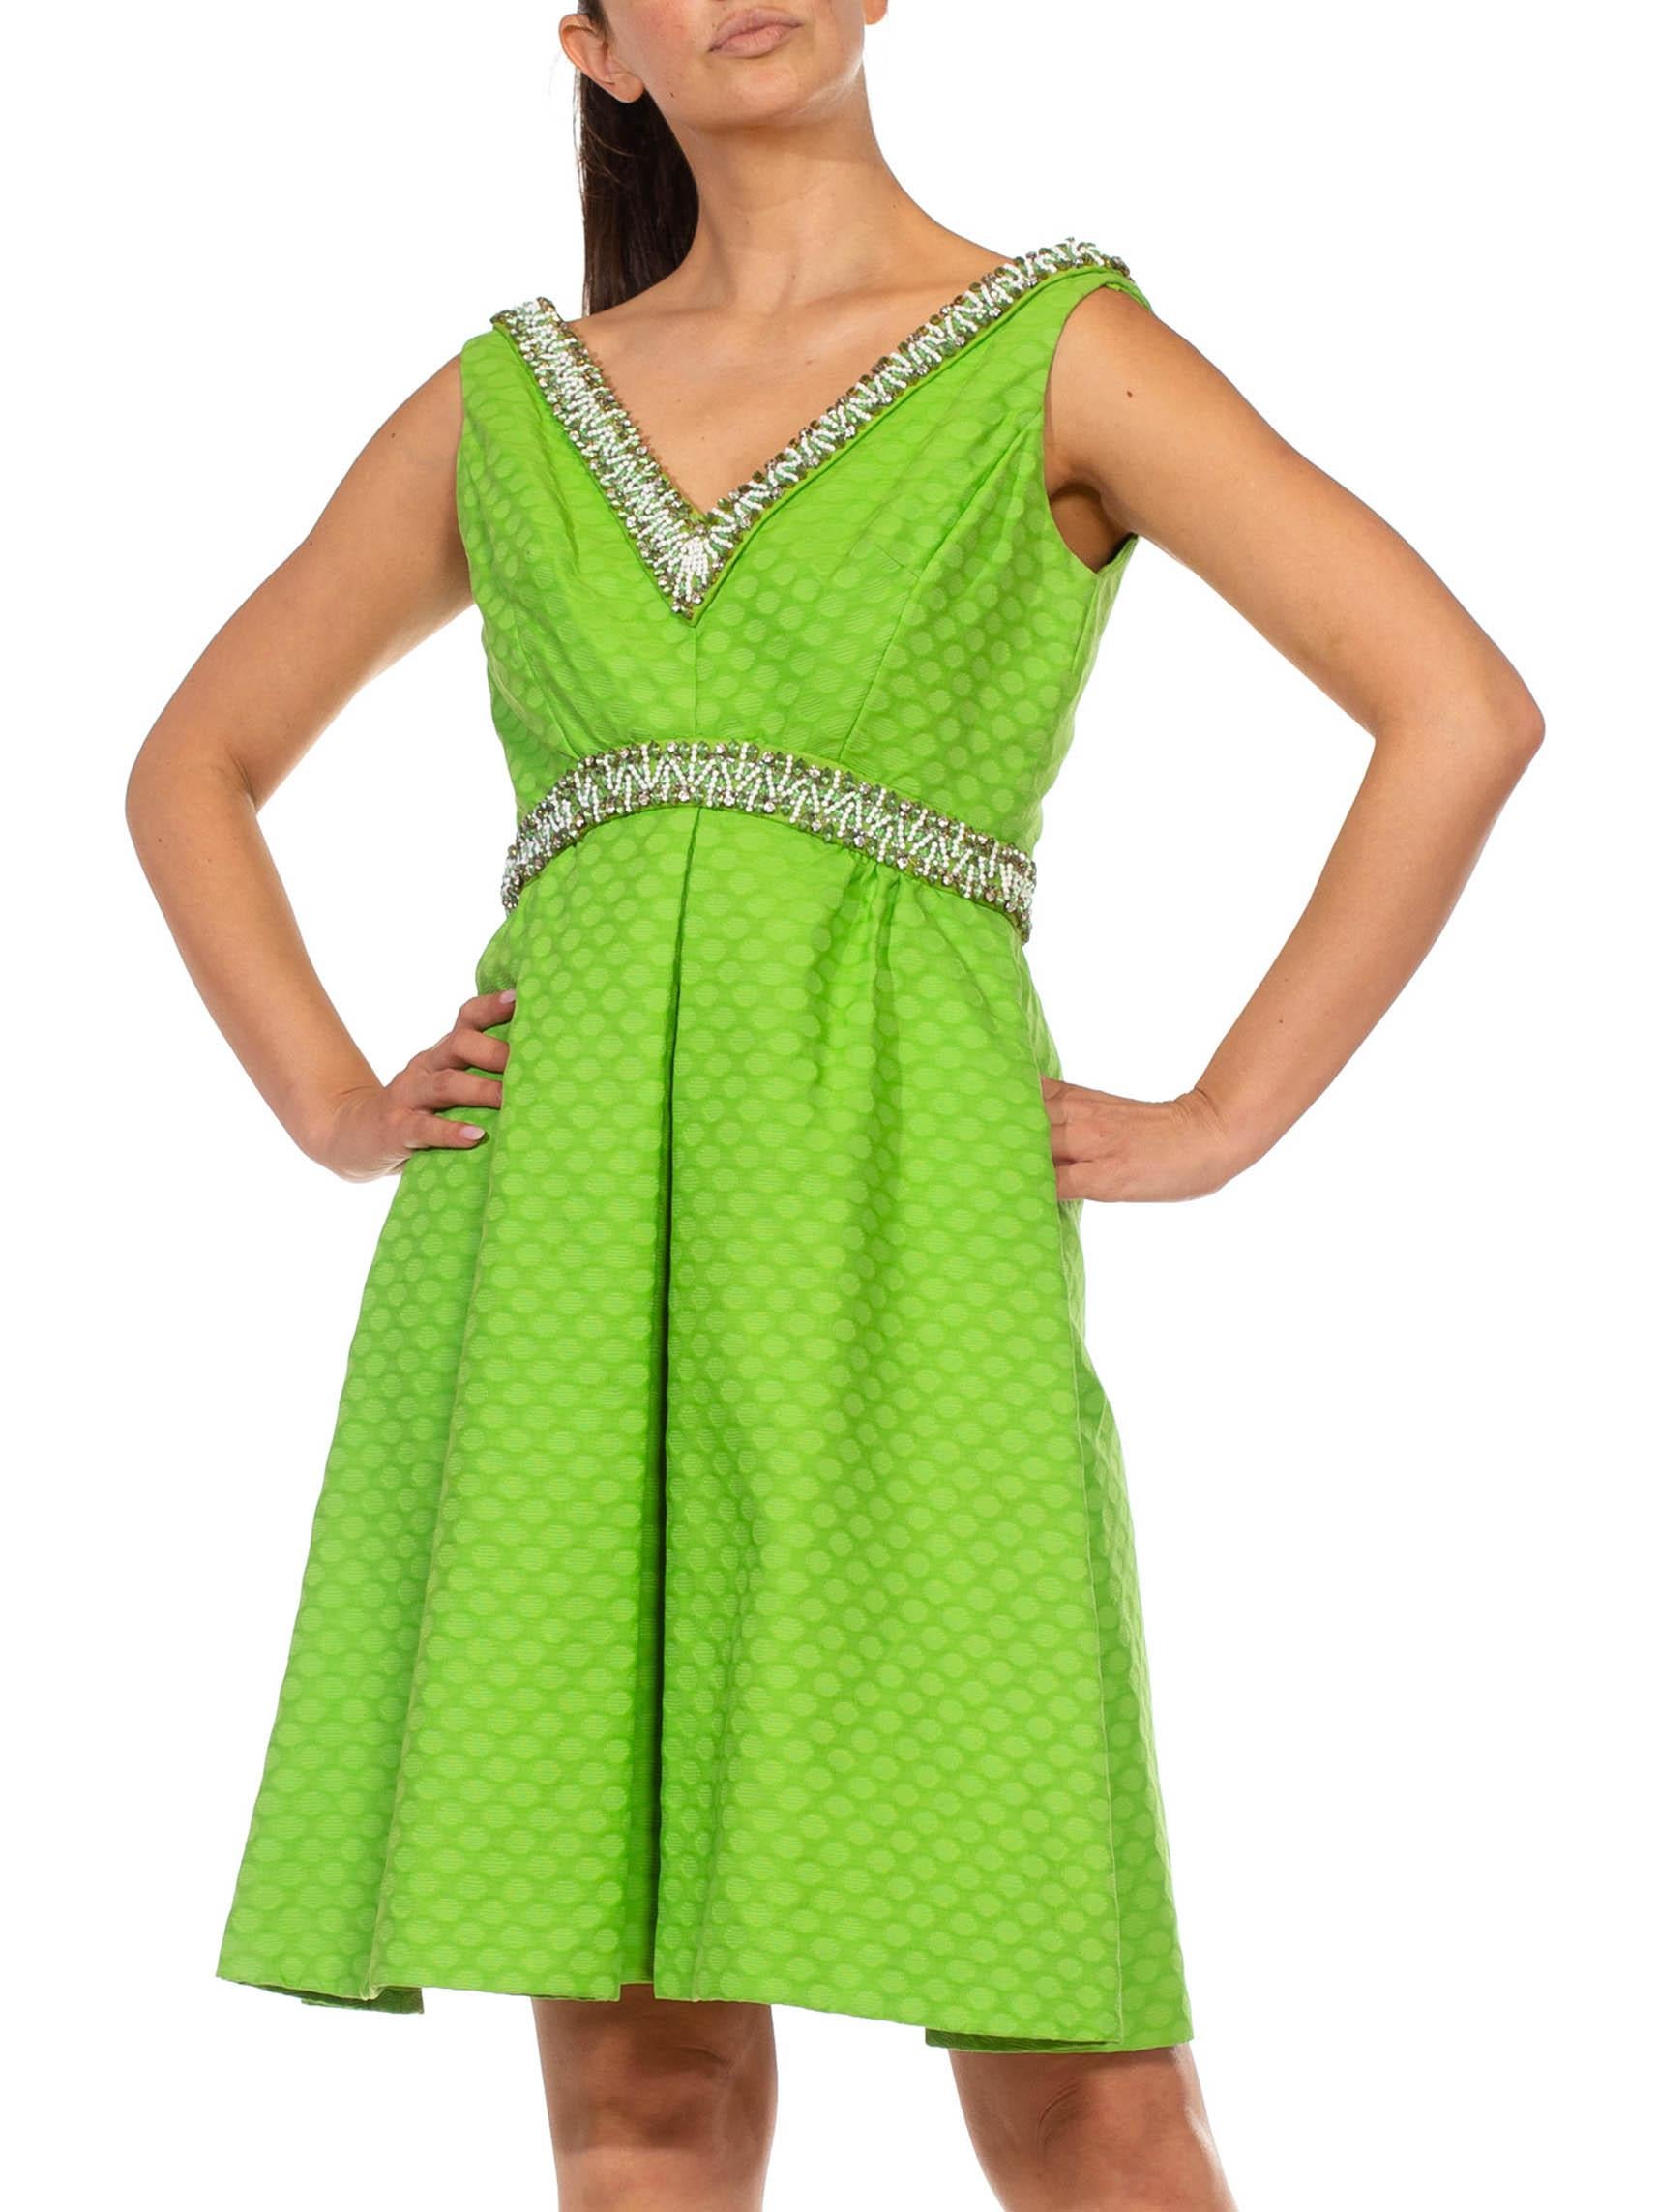 Women's 1960S Lime Green Cotton Jacquard Cocktail Dress With Beaded Neckline And Waist For Sale